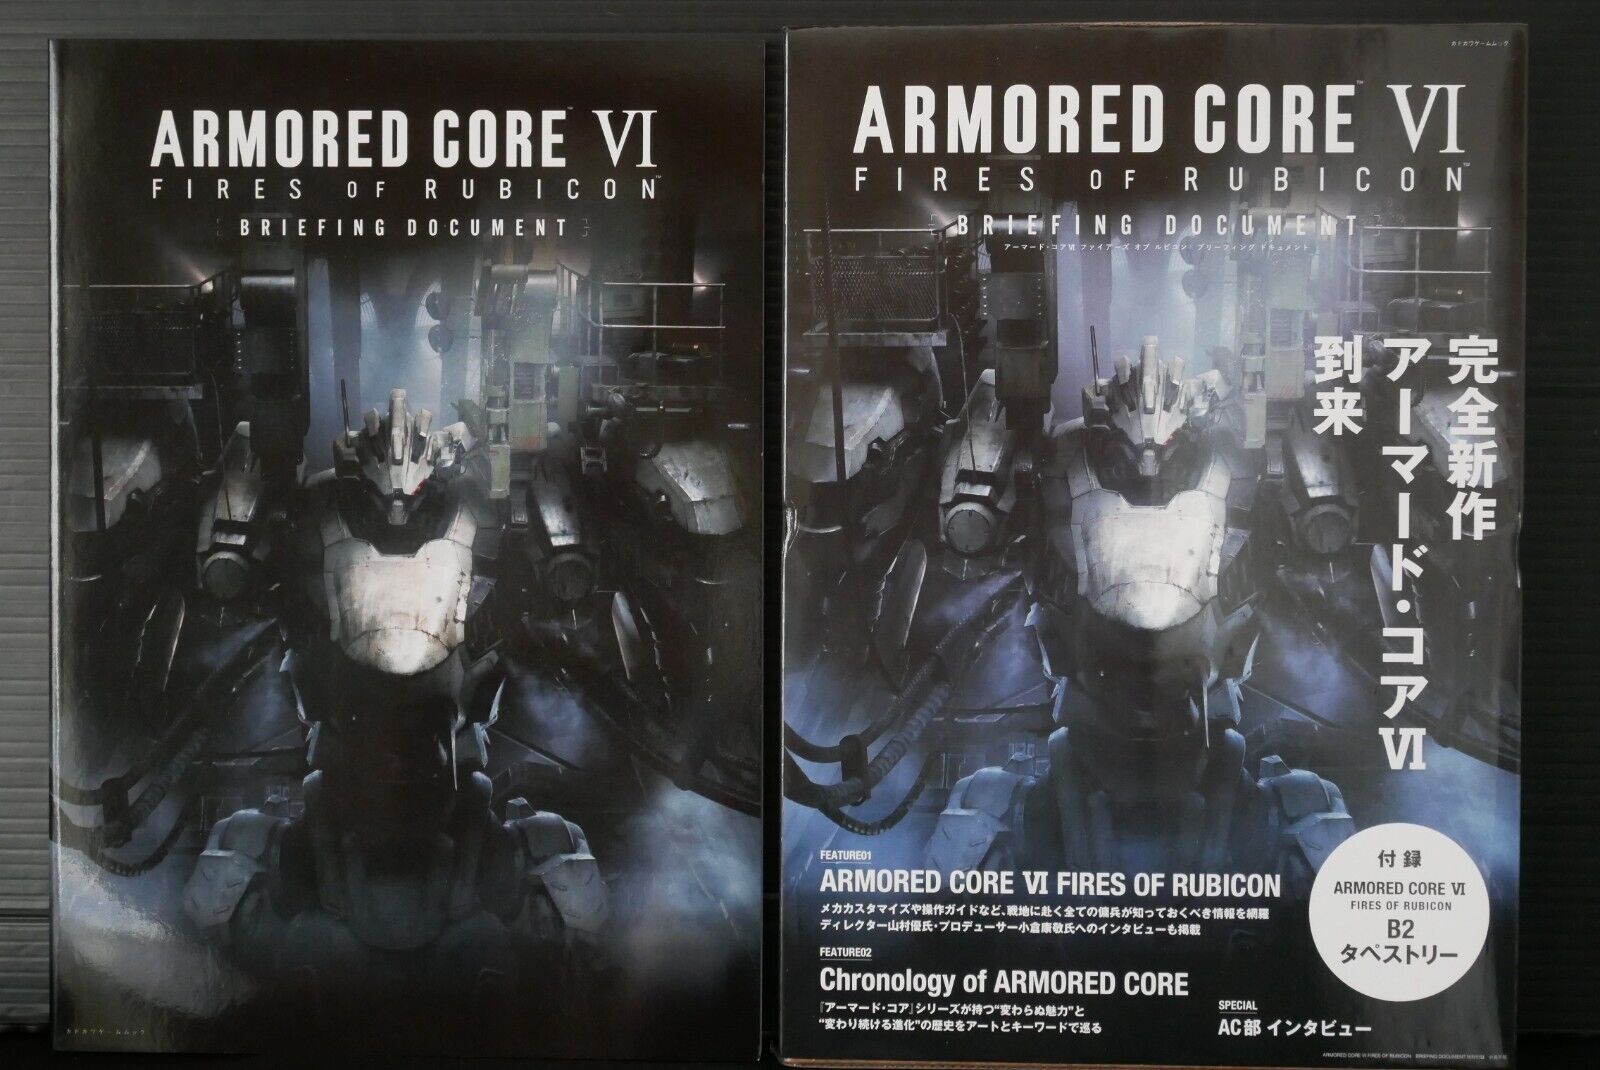 Armored Core VI Fires Of Rubicon Briefing Document - from JAPAN